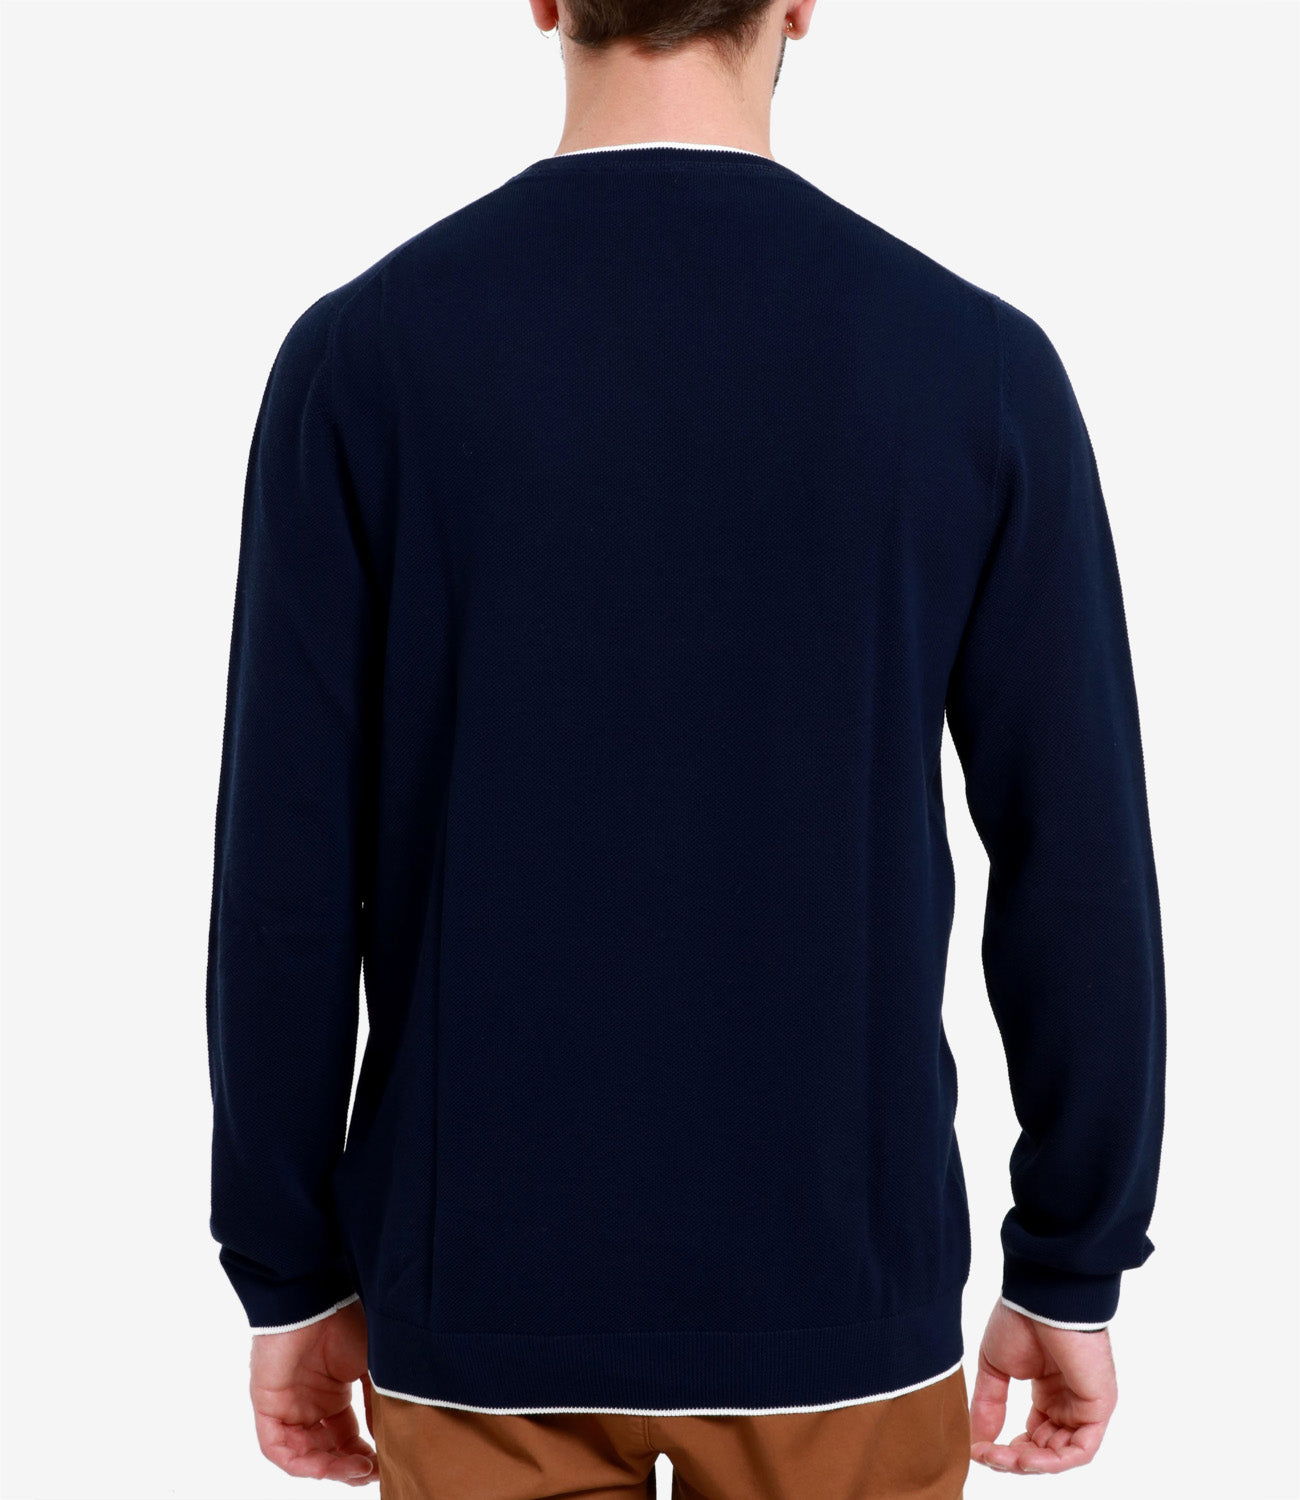 Fay | Navy Blue and White Sweater